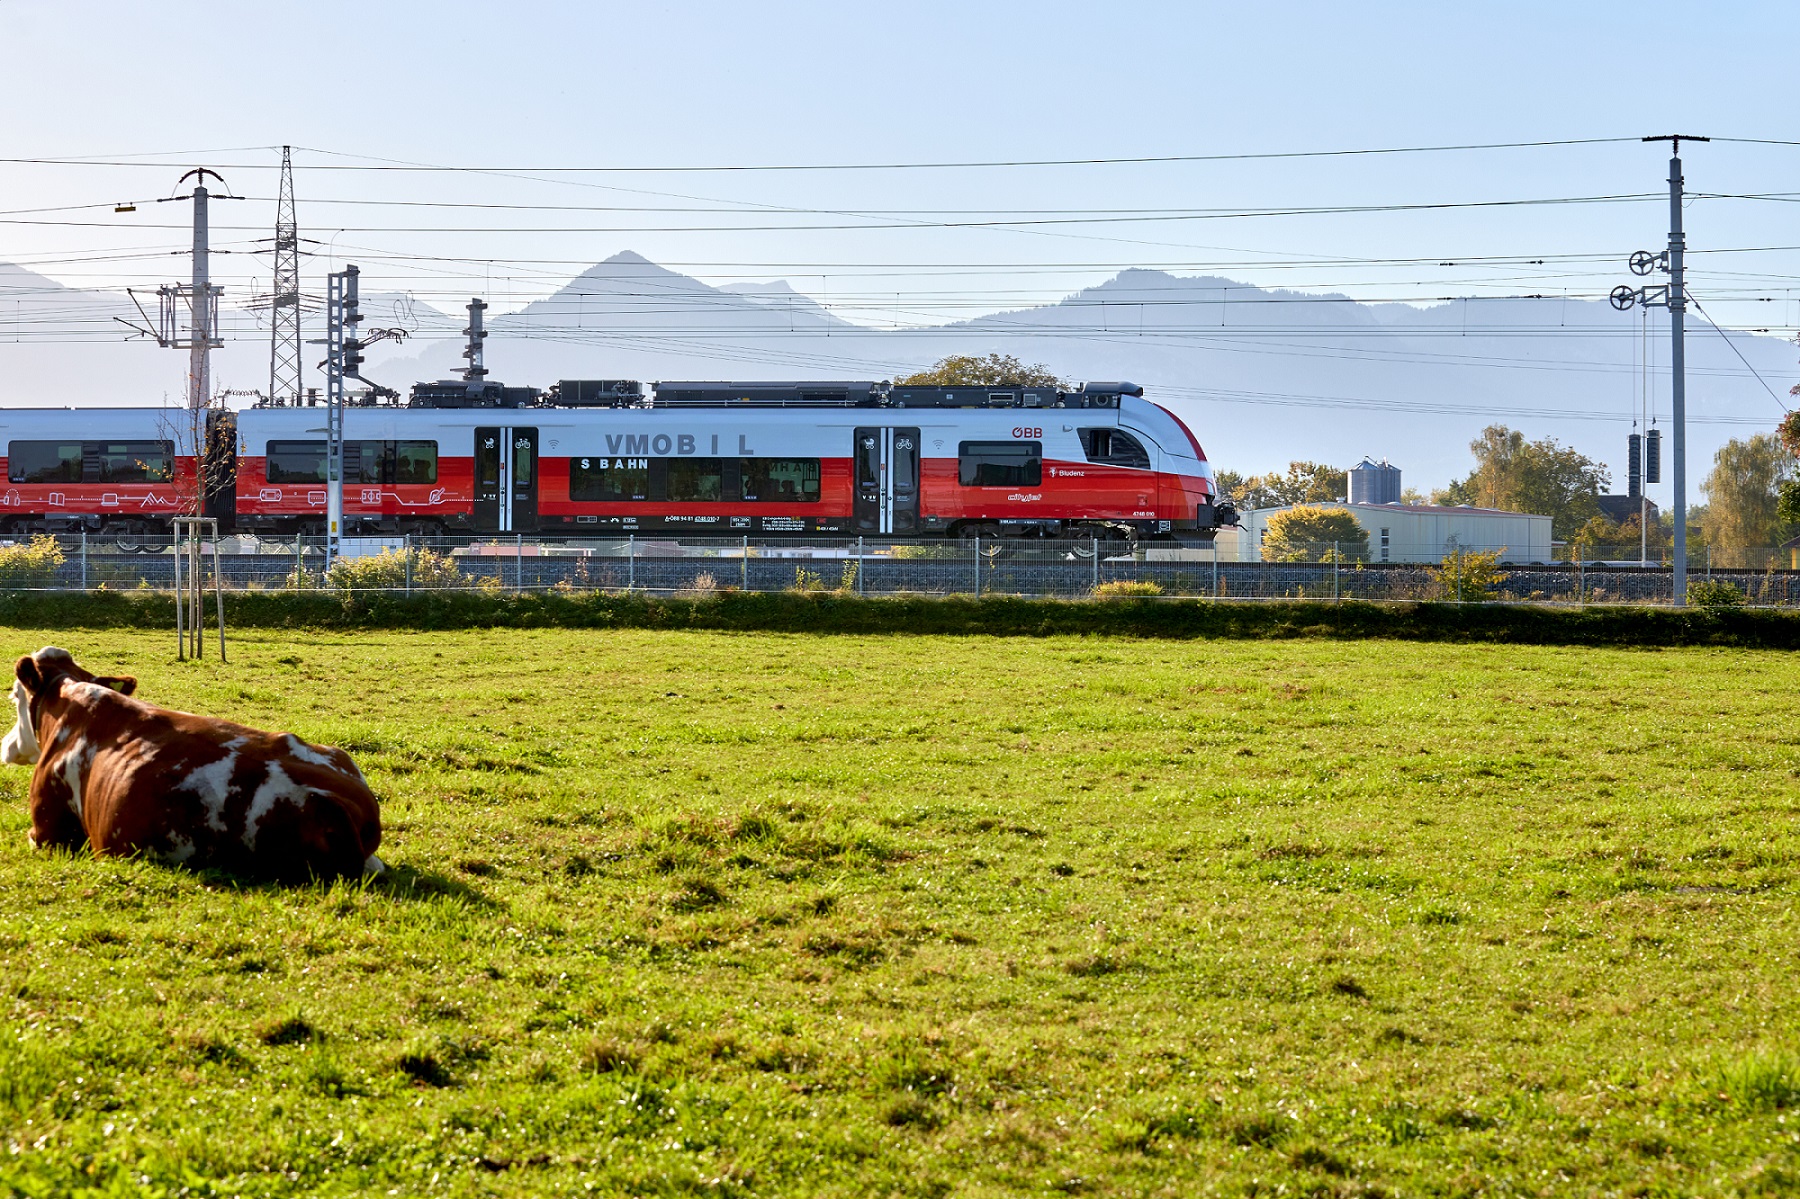 The last of 21 sets from the Desiro ML series was recently transferred from Siemens Mobility to Vorarlberg